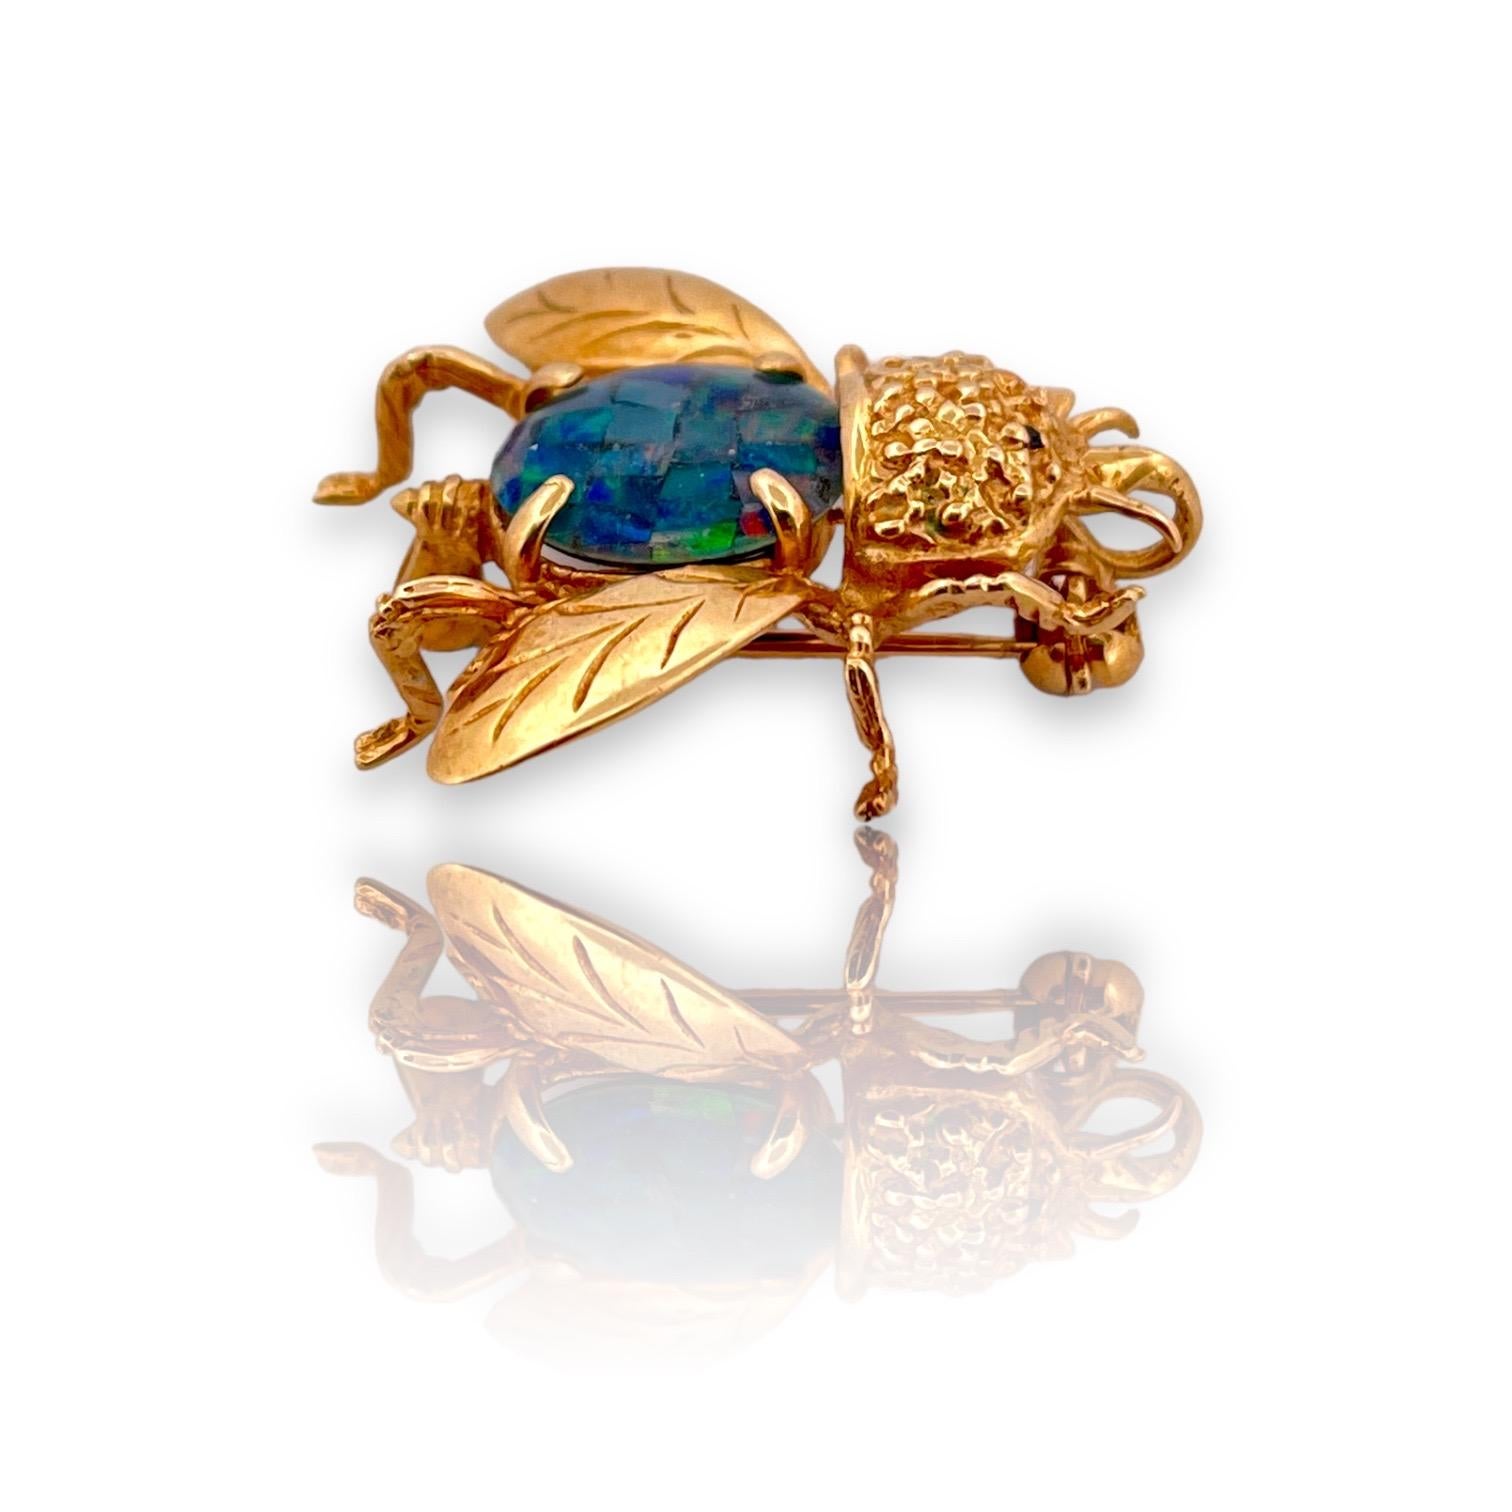 Modern Whimsical Boulder Opal Bee Brooch in 14K Yellow Gold